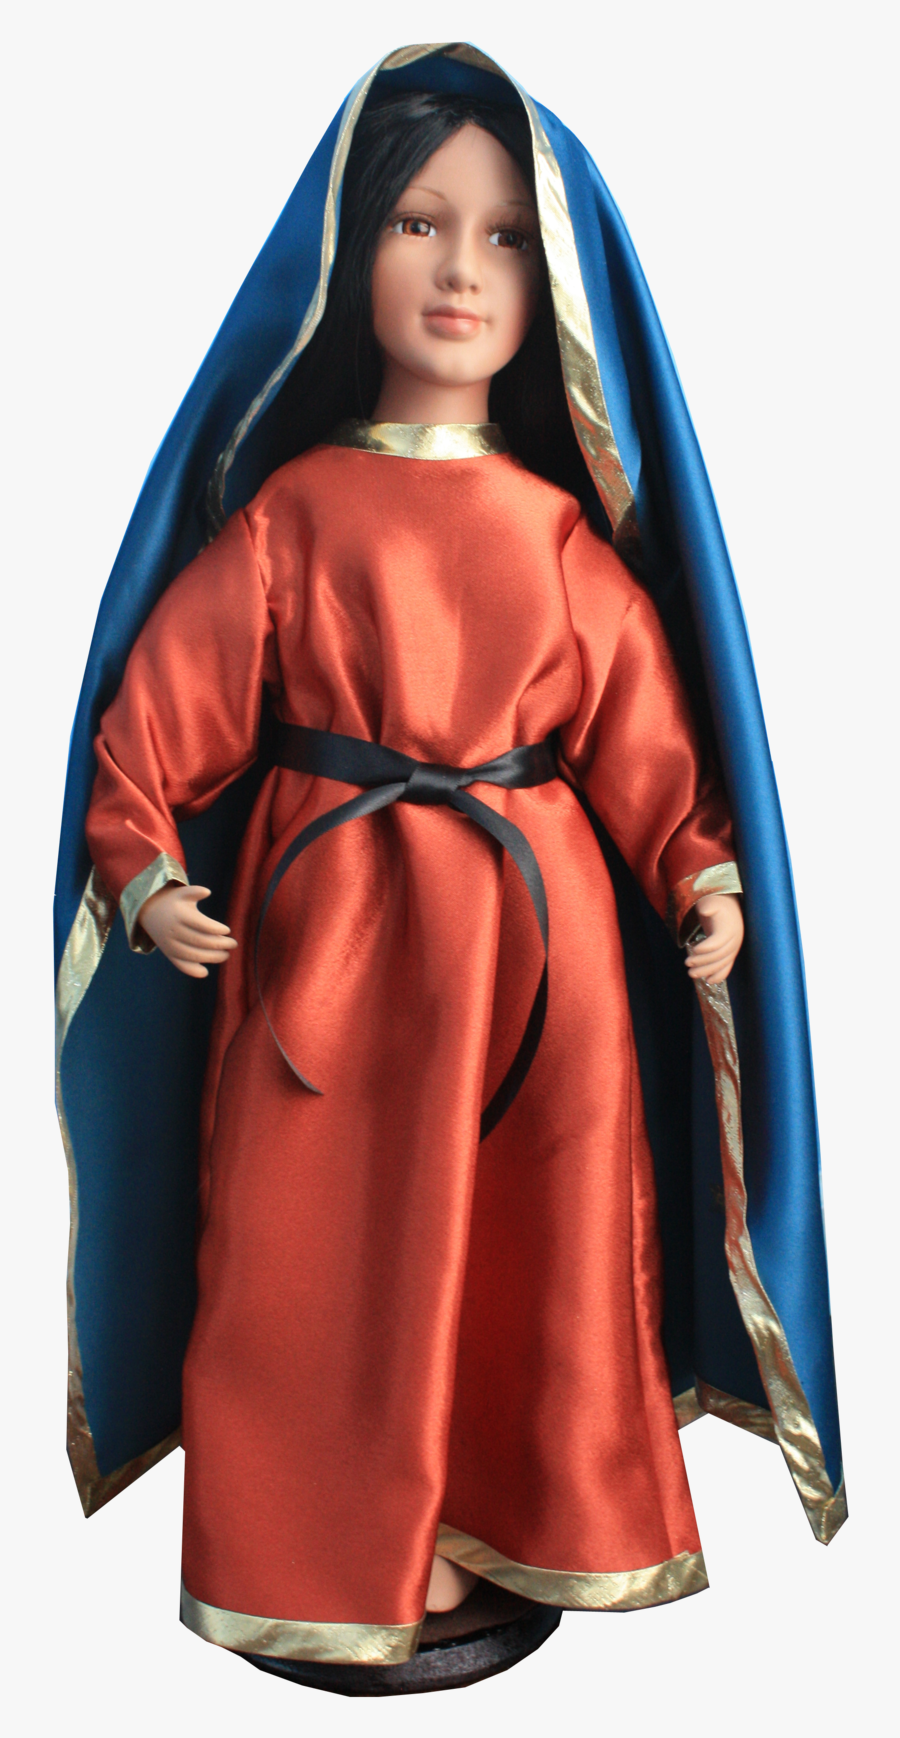 virgin mary png blessed mother dolls free transparent clipart clipartkey virgin mary png blessed mother dolls